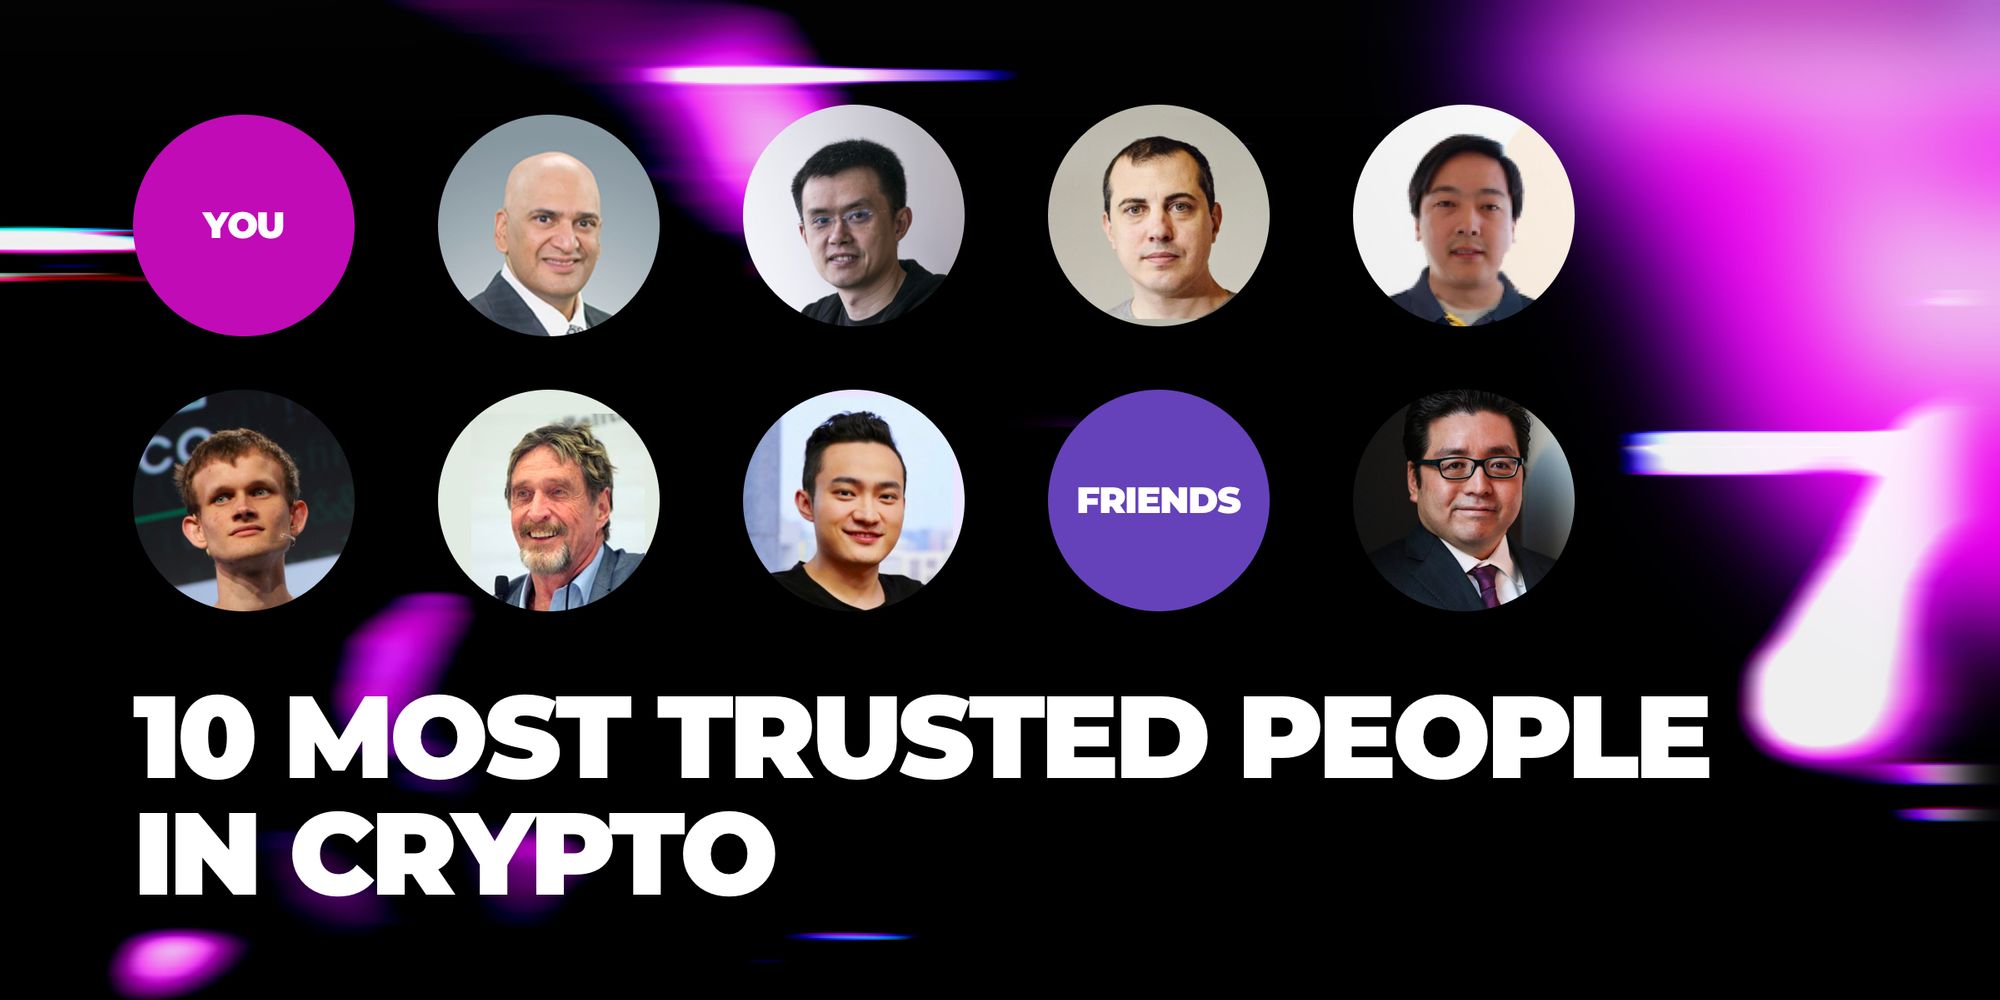 The 10 most trusted people in crypto